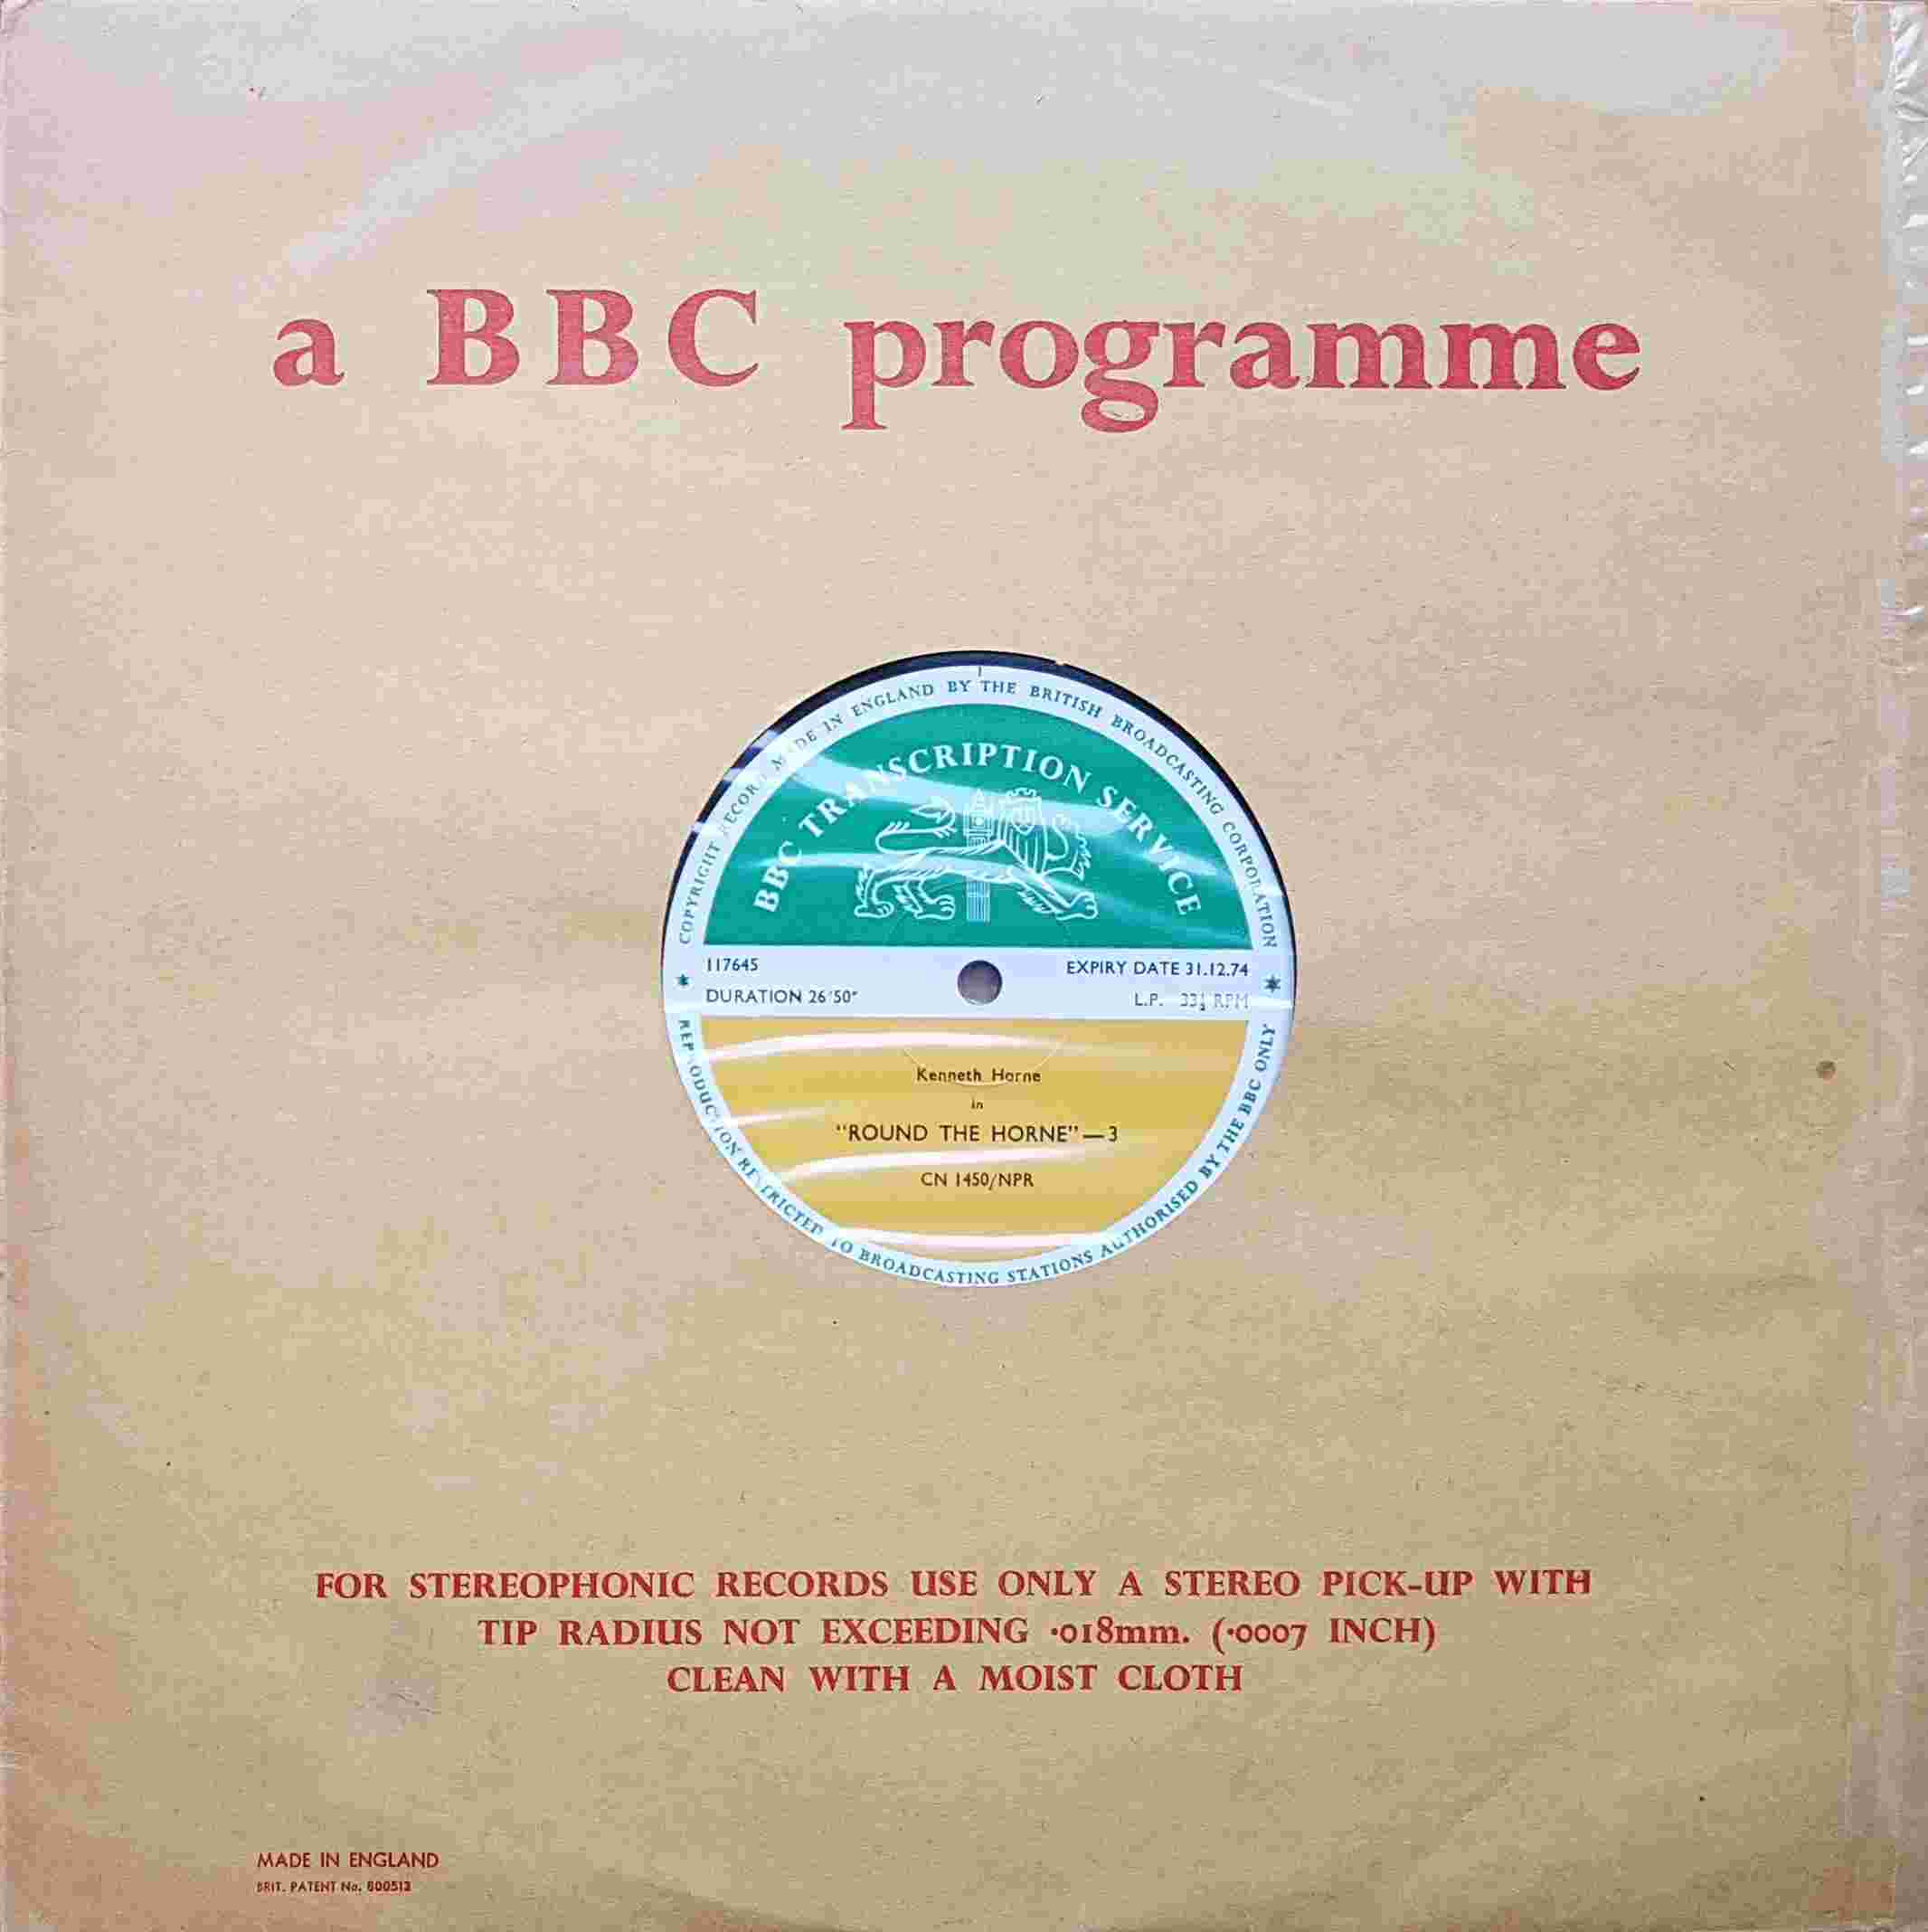 Picture of CN 1450 NPR 2 Round the Horne - 3 & 4 by artist Kenneth Horne from the BBC albums - Records and Tapes library